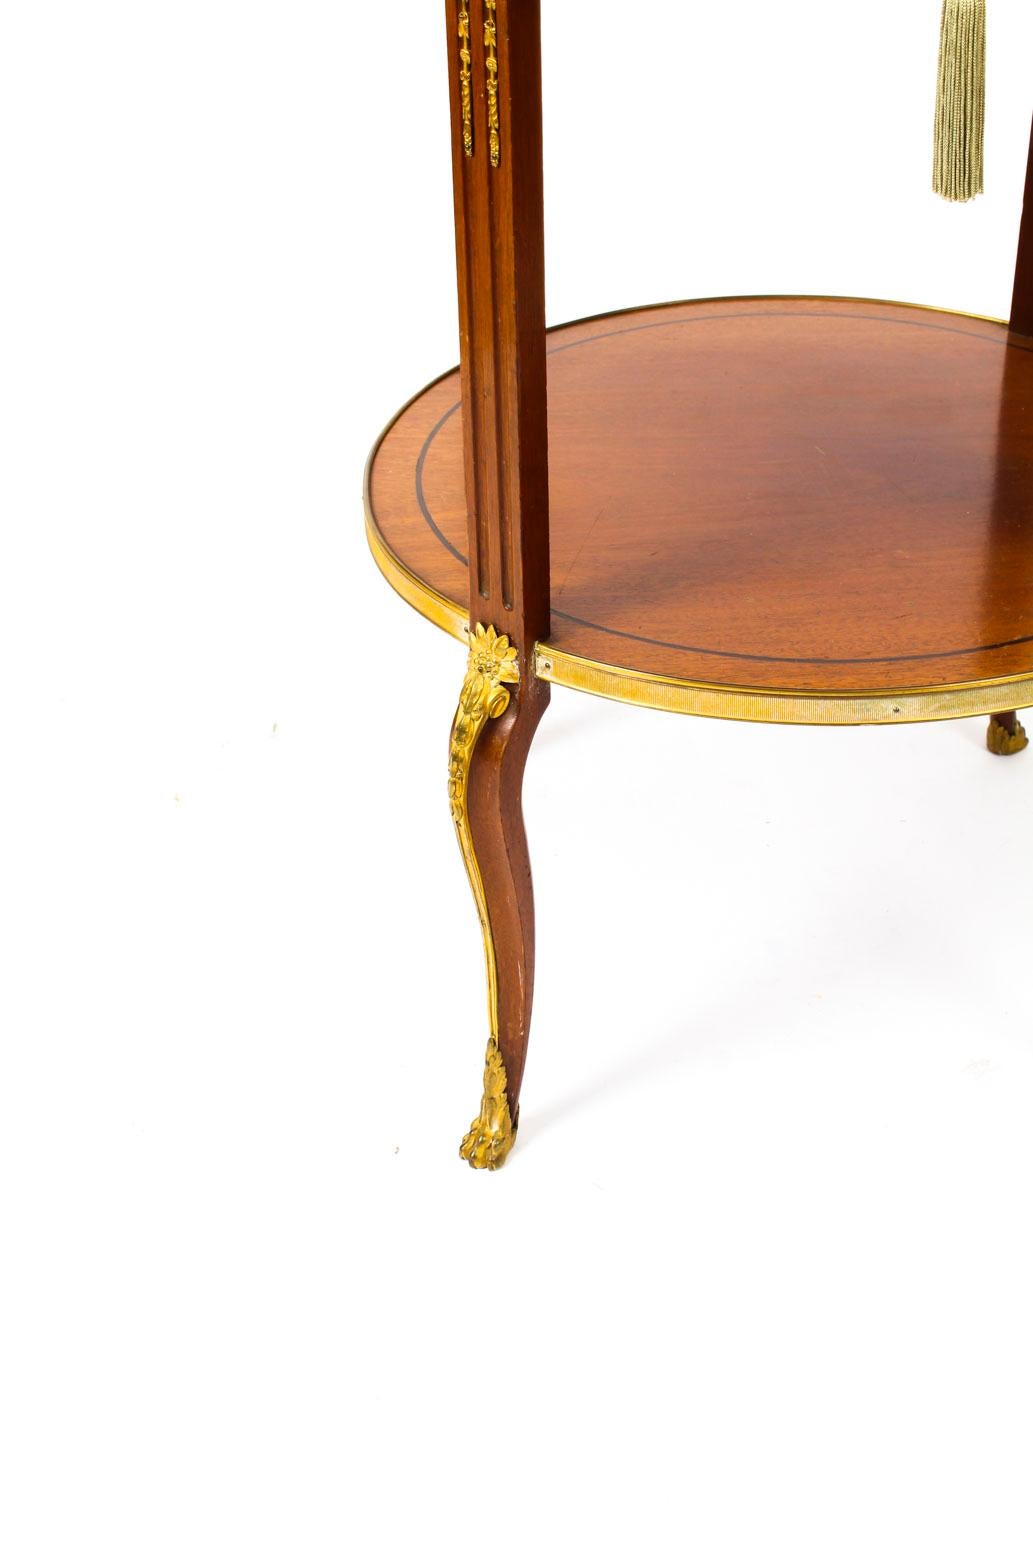 Antique French Louis Revival Marble and Ormolu Occasional Table, 19th Century For Sale 2